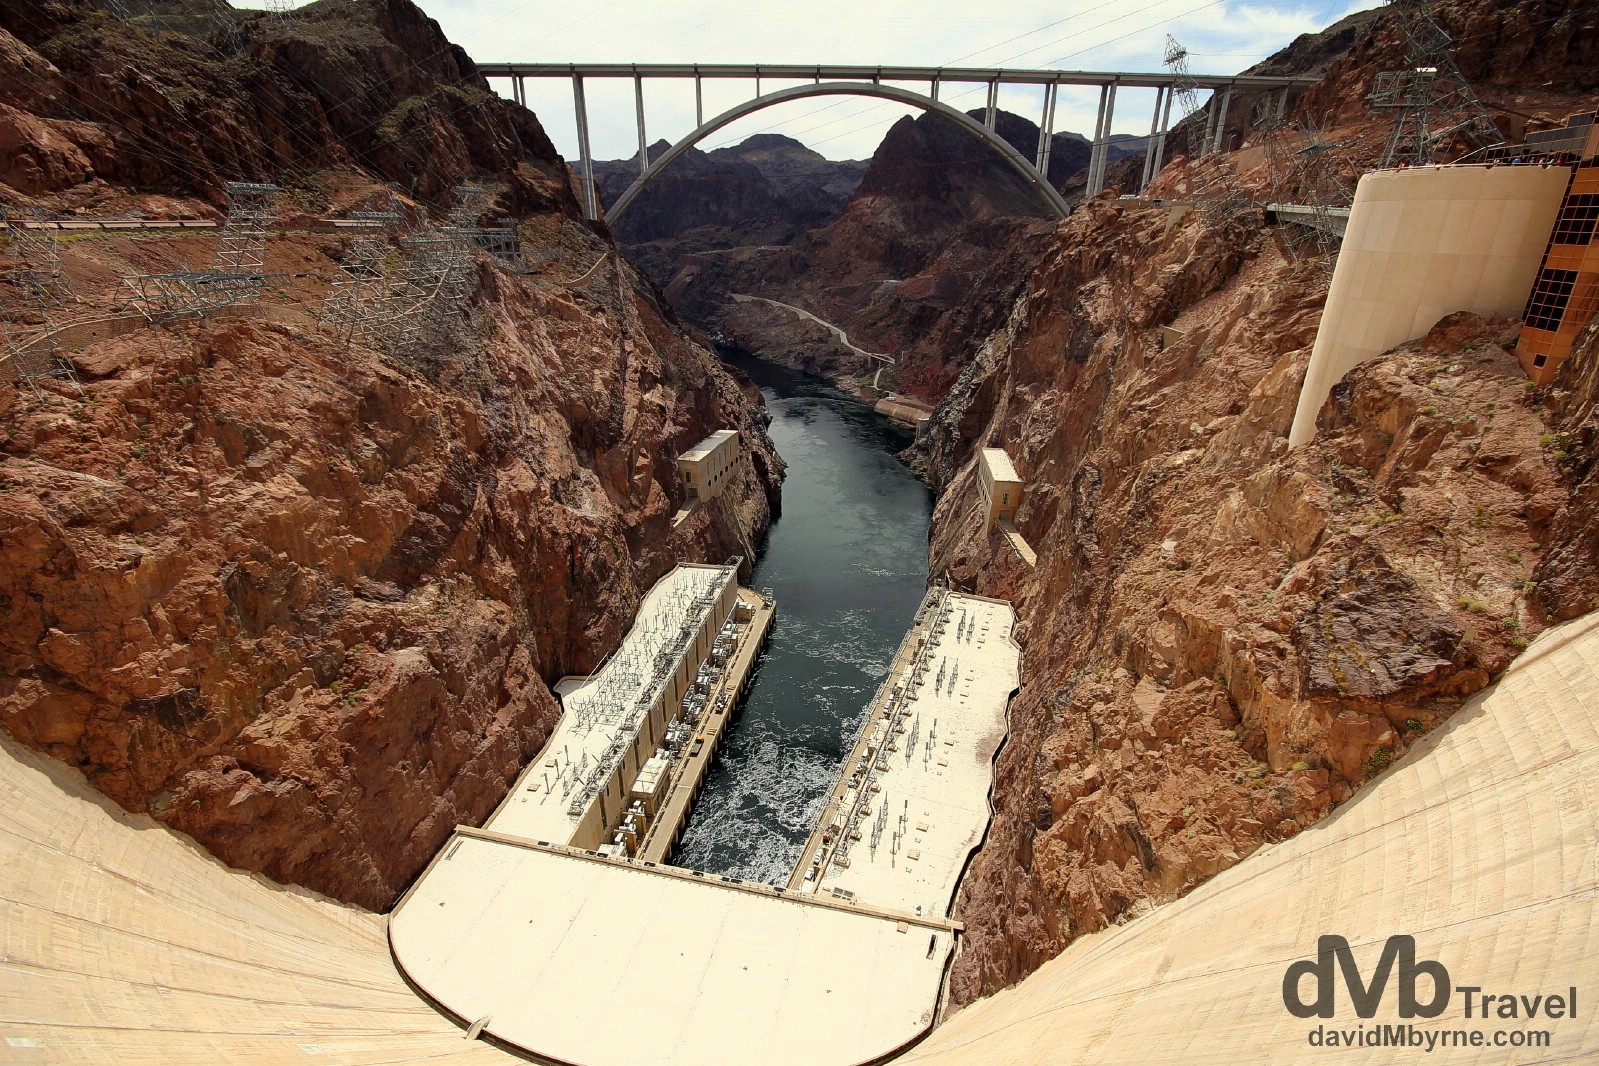 The new Mike O’Callaghan-Pat Tillman Memorial Bridge spanning the Black Canyon as seen from the apex of the Hoover Dam on the Nevada (right) & Arizona (left) border, USA. April 6th 2013.